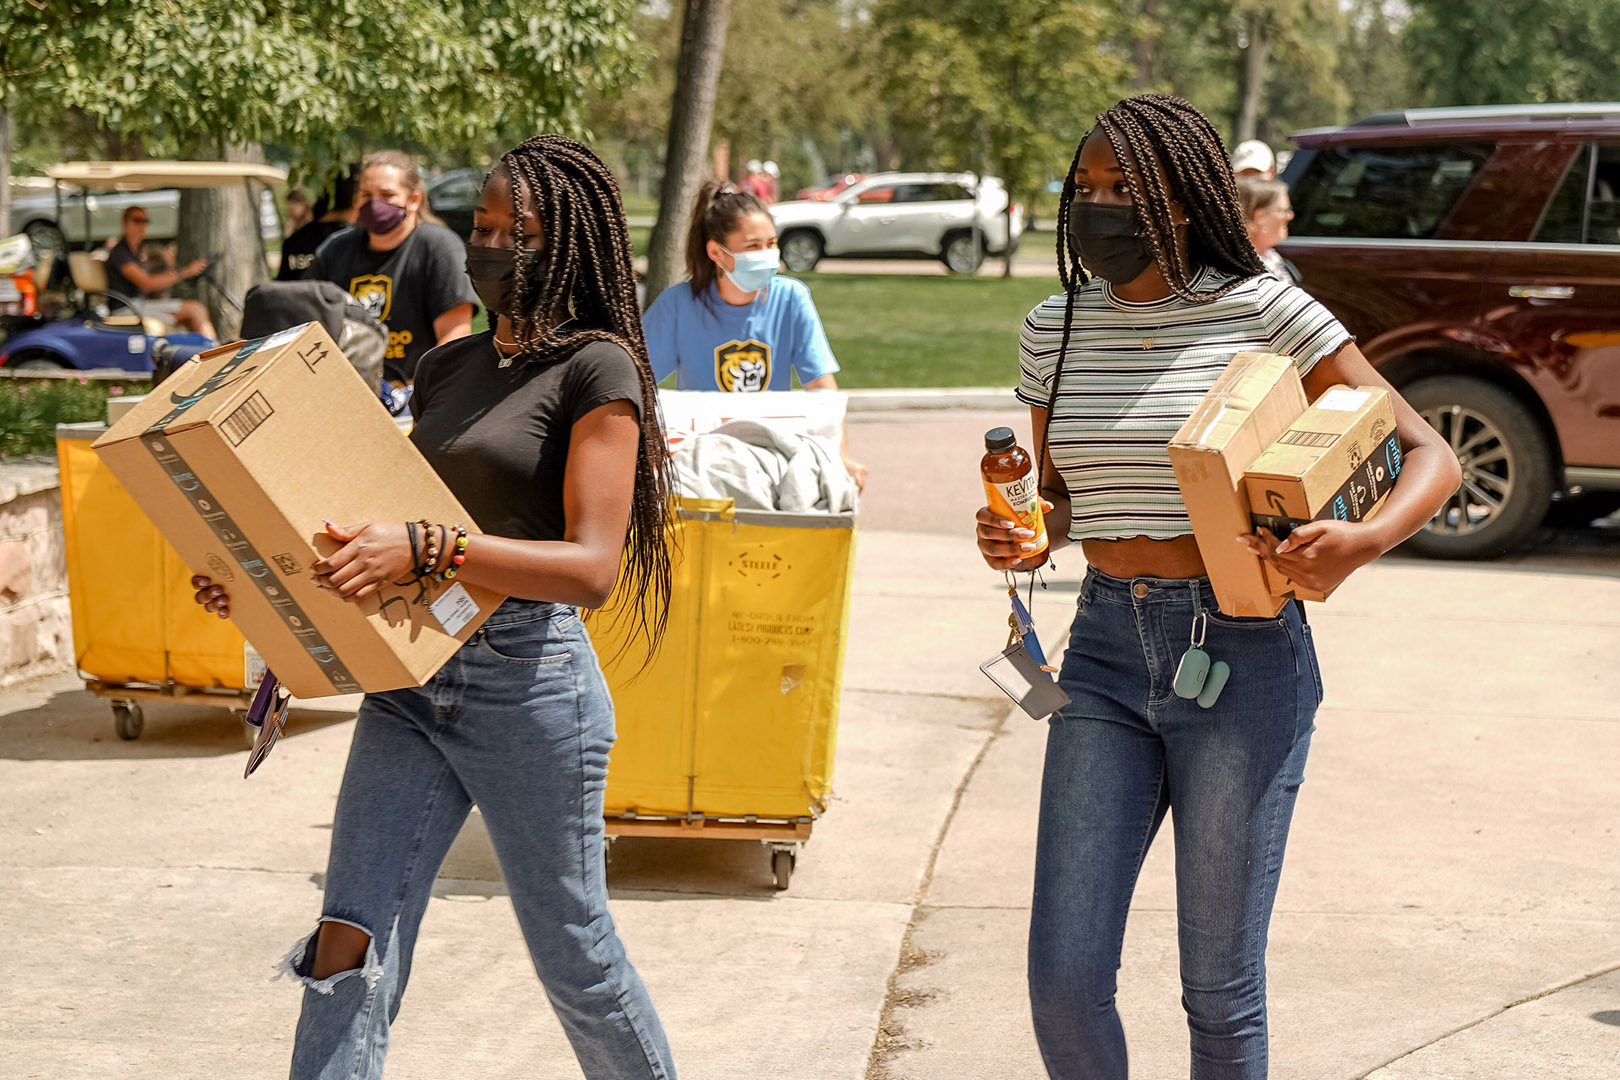 New Colorado College students move into their residence halls. Photo by Gray Warrior